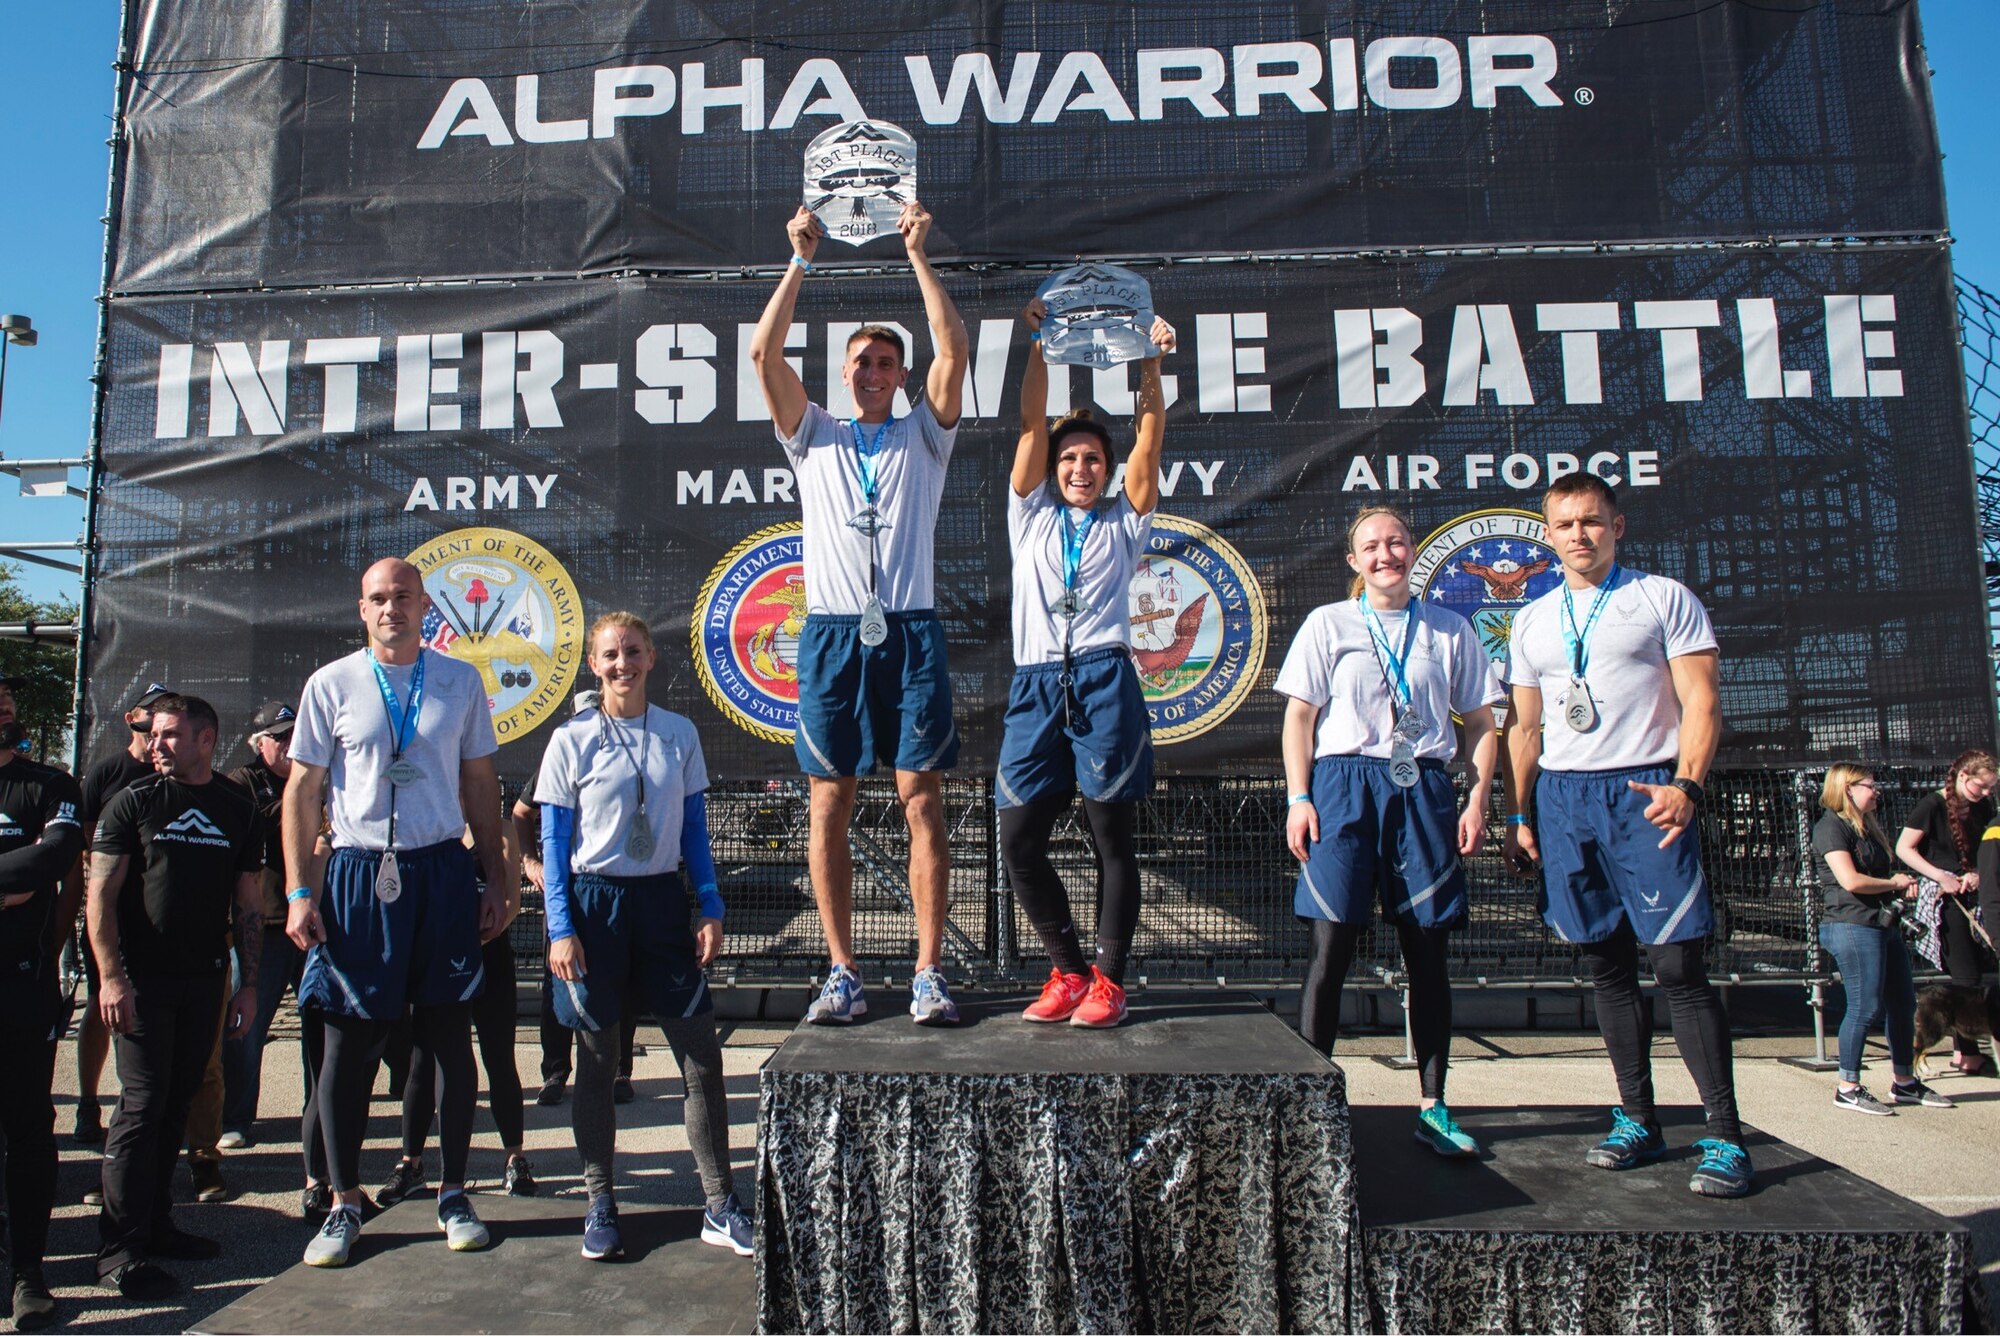 Winners from the 2018 Air Force Alpha Warrior Final Battle pose for photos during the awards ceremony, Friday, November 16, 2018 at the Alpha Warrior Proving Grounds, Retama Park, Selma, Texas.